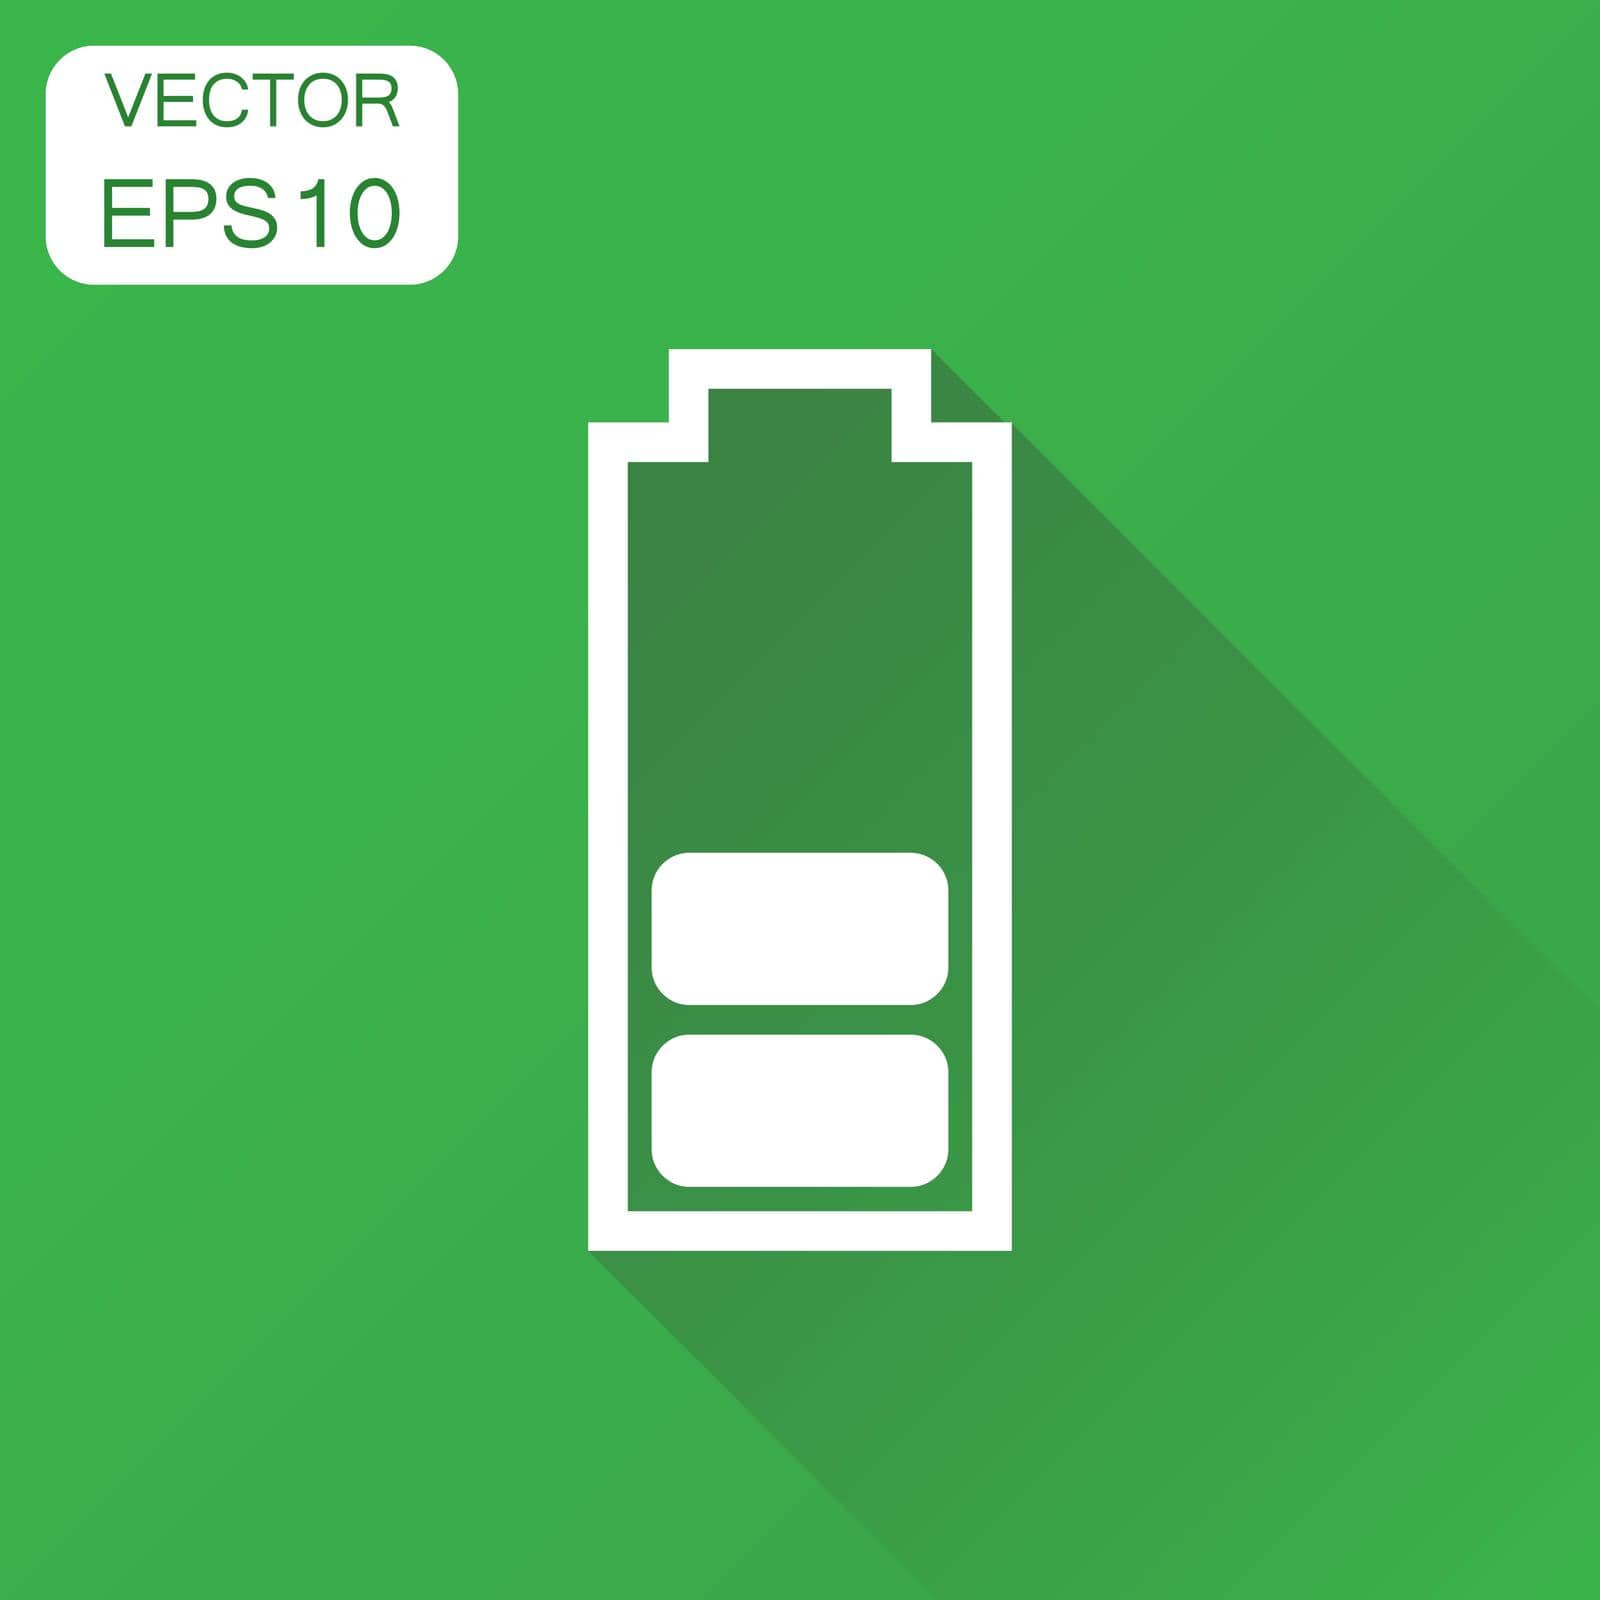 Battery charge level indicator icon. Business concept battery pictogram. Vector illustration on green background with long shadow.